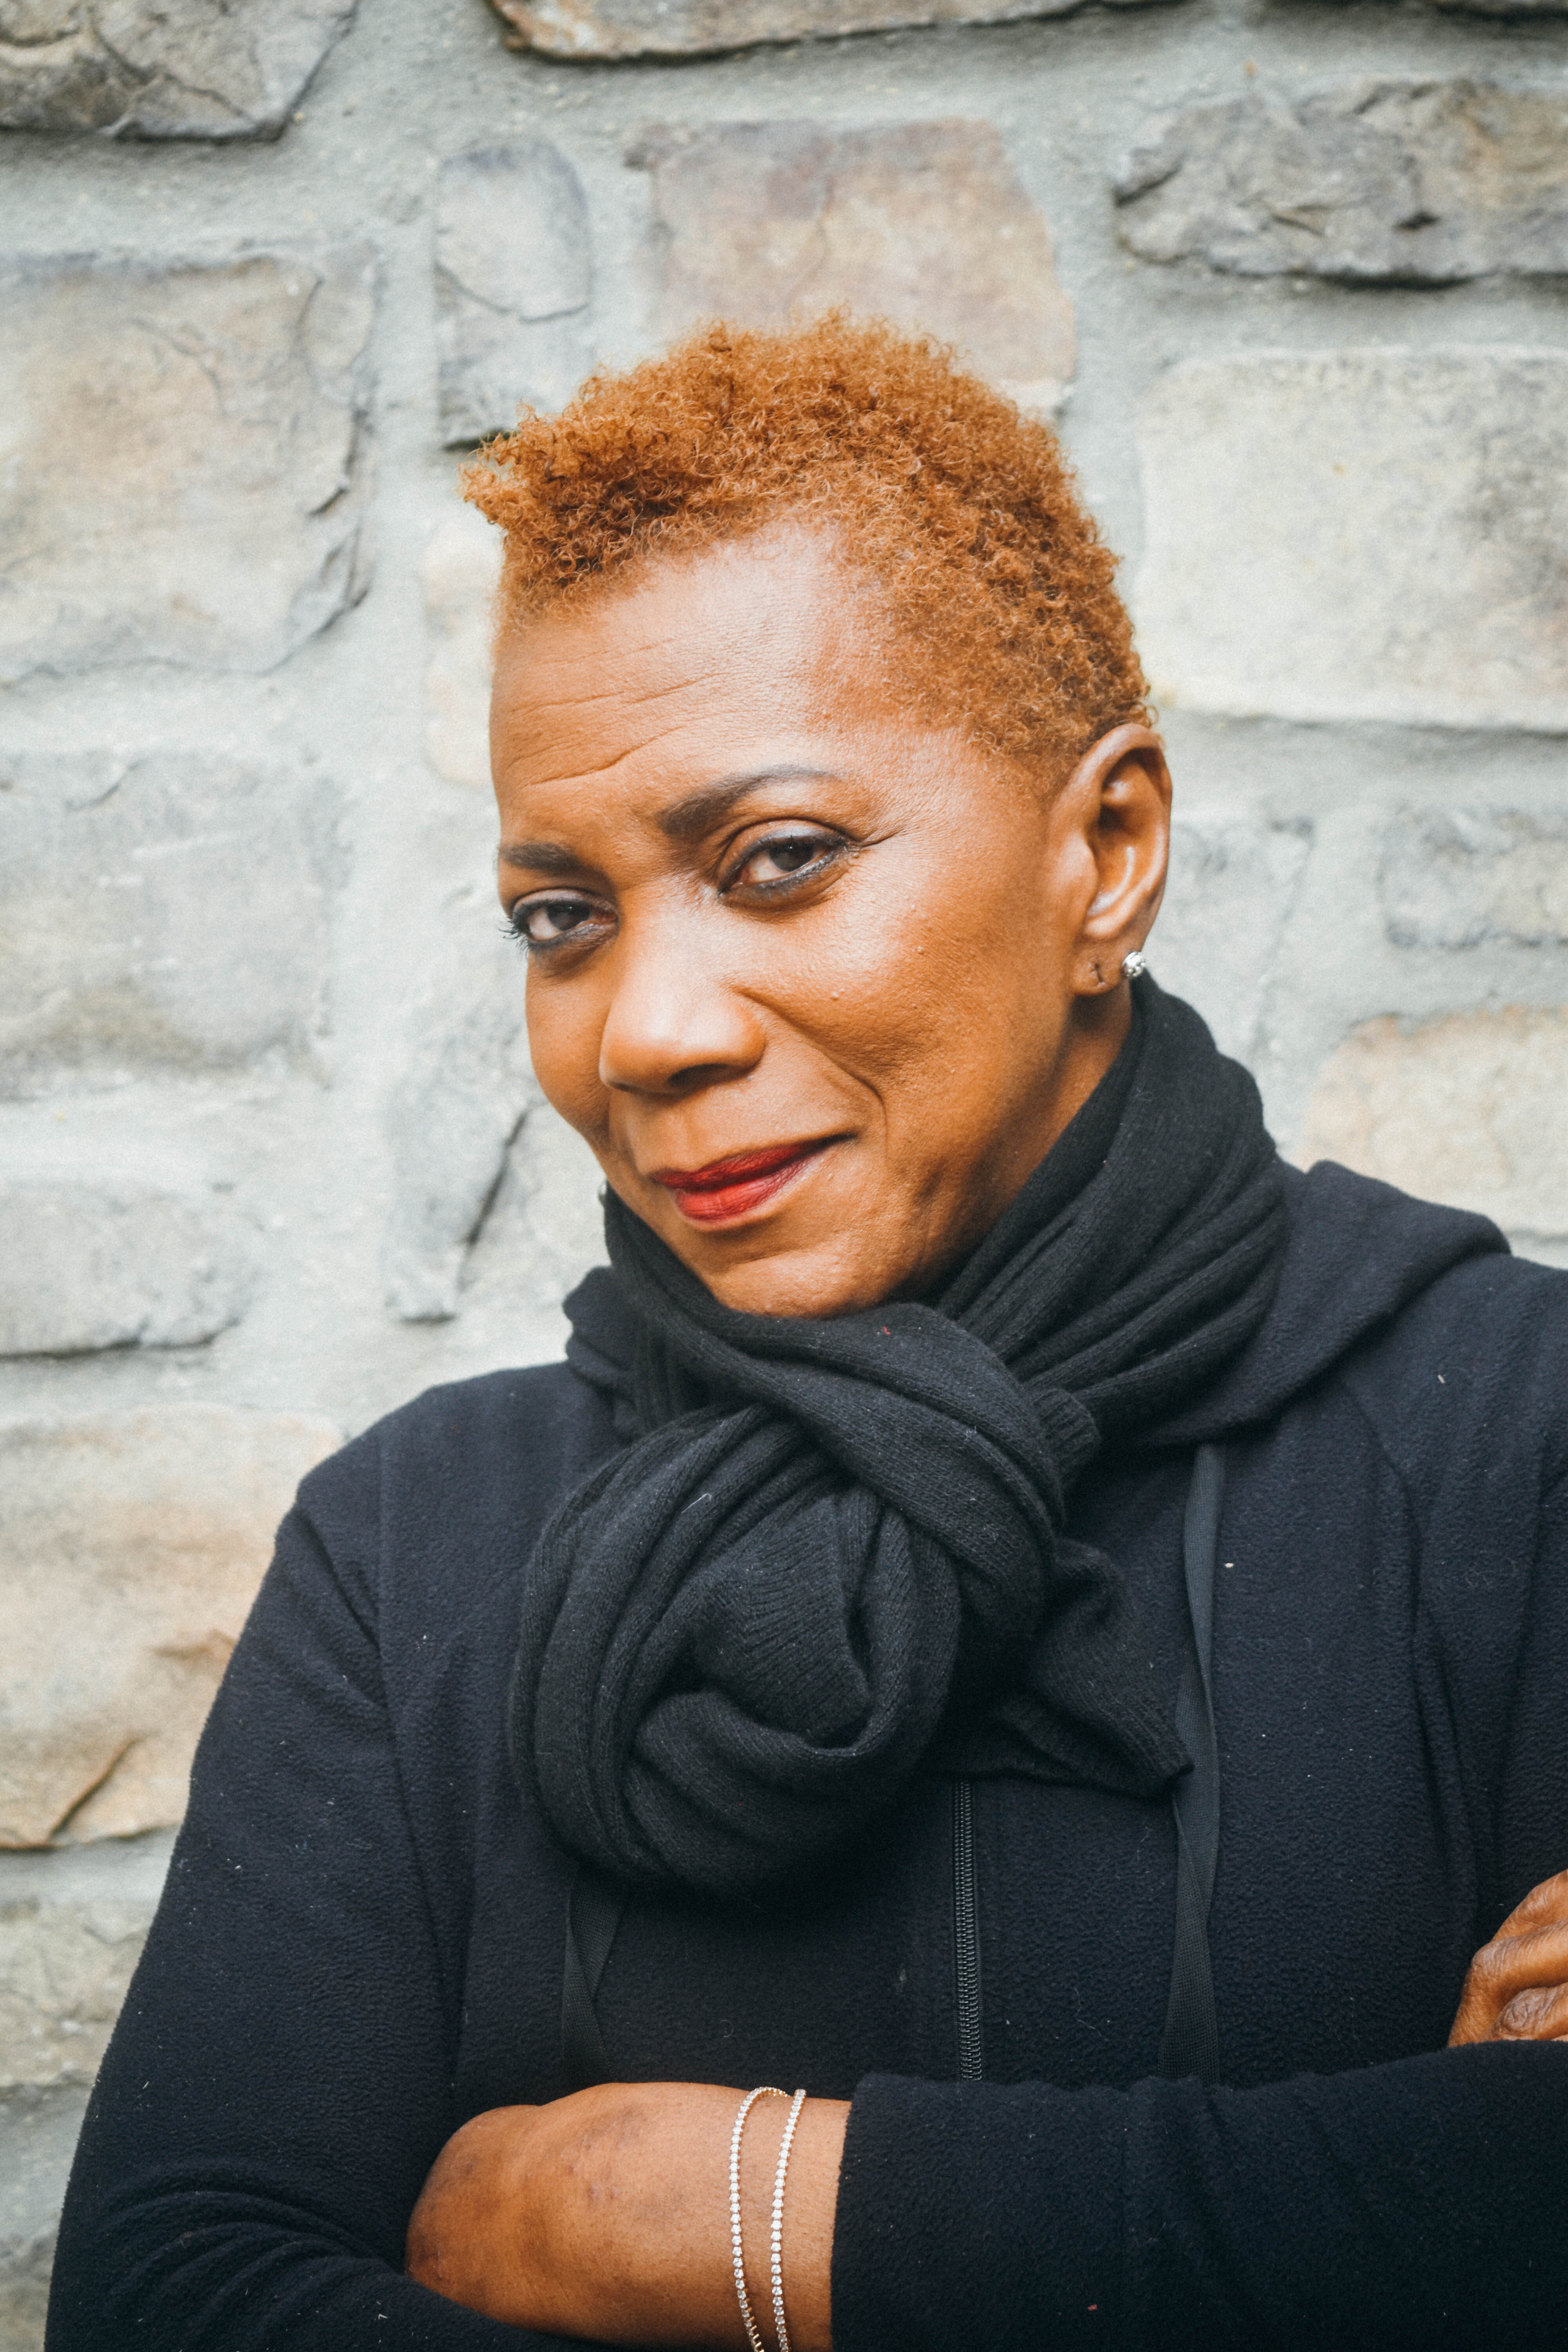 Five Lessons from Composer, arranger and visual artist Carmen Lundy